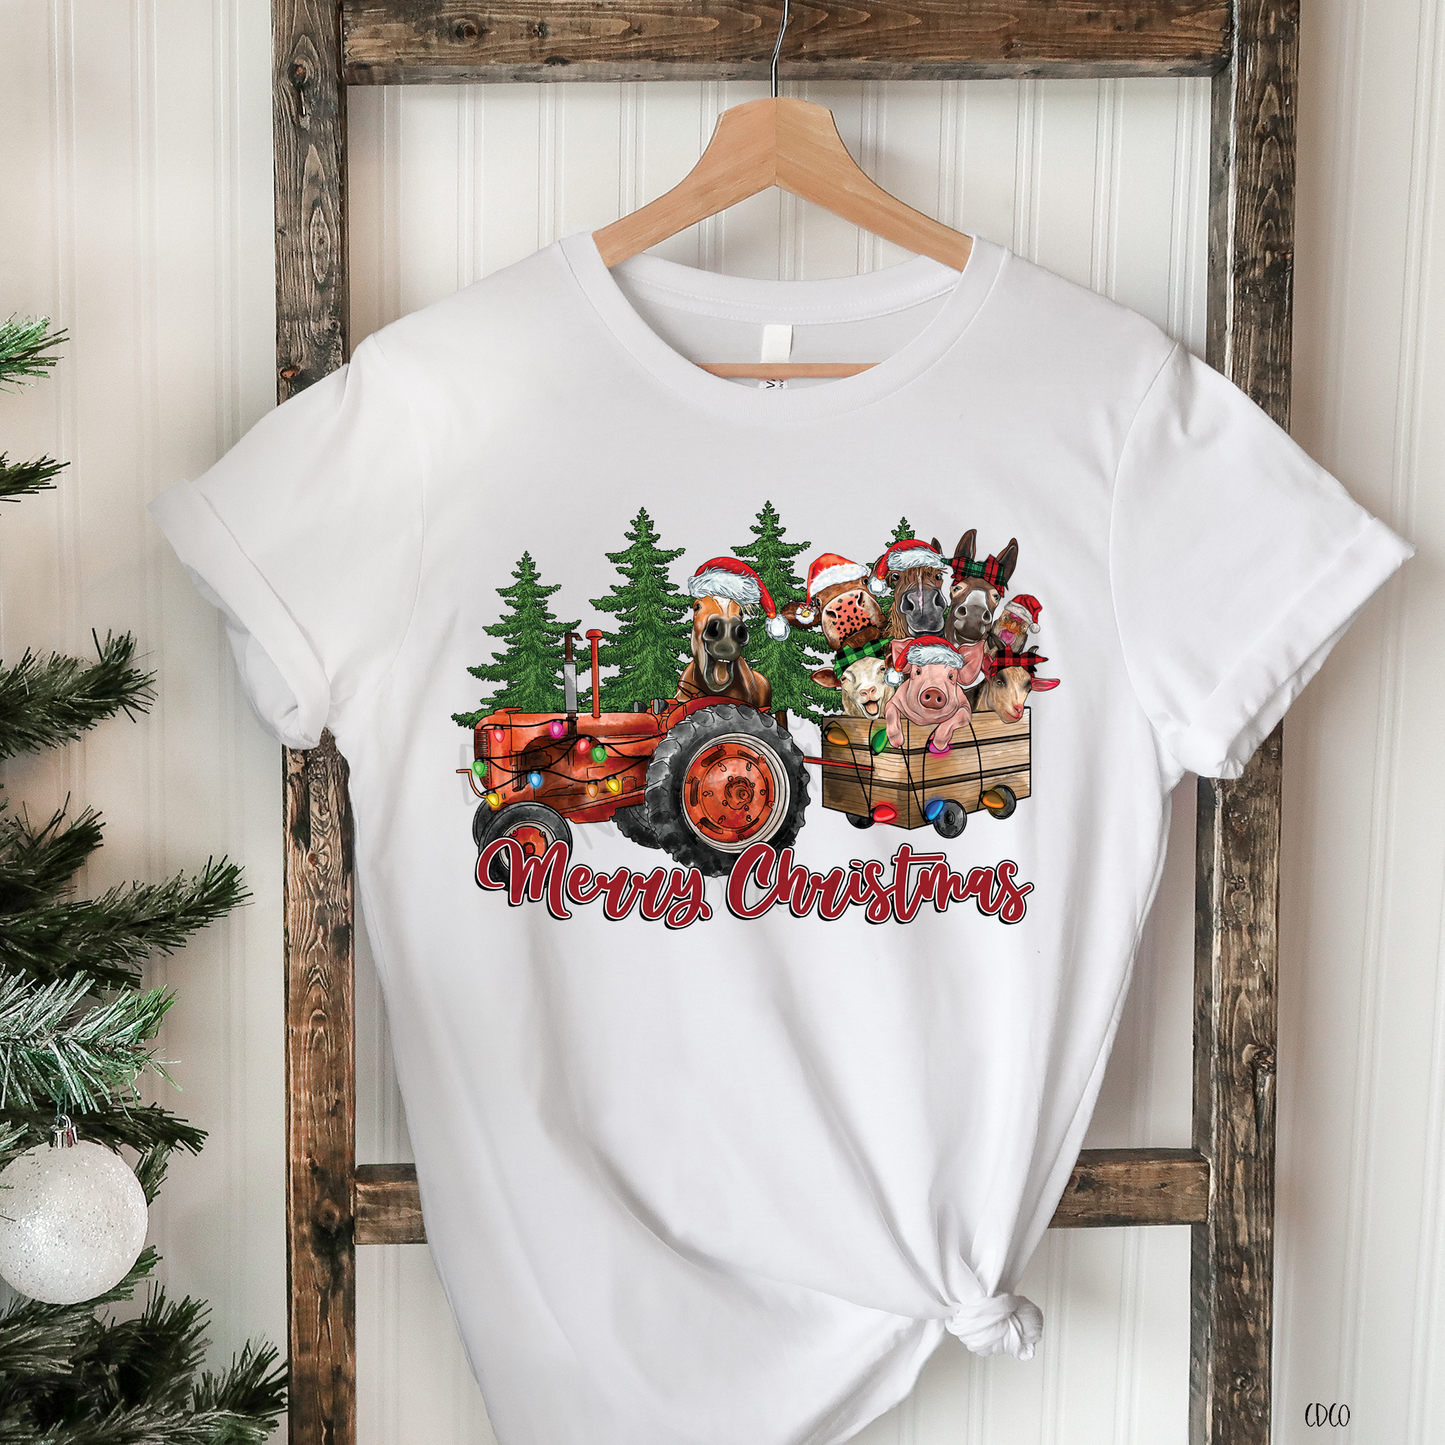 Merry Christmas Animals on Tractor (350°-375°)